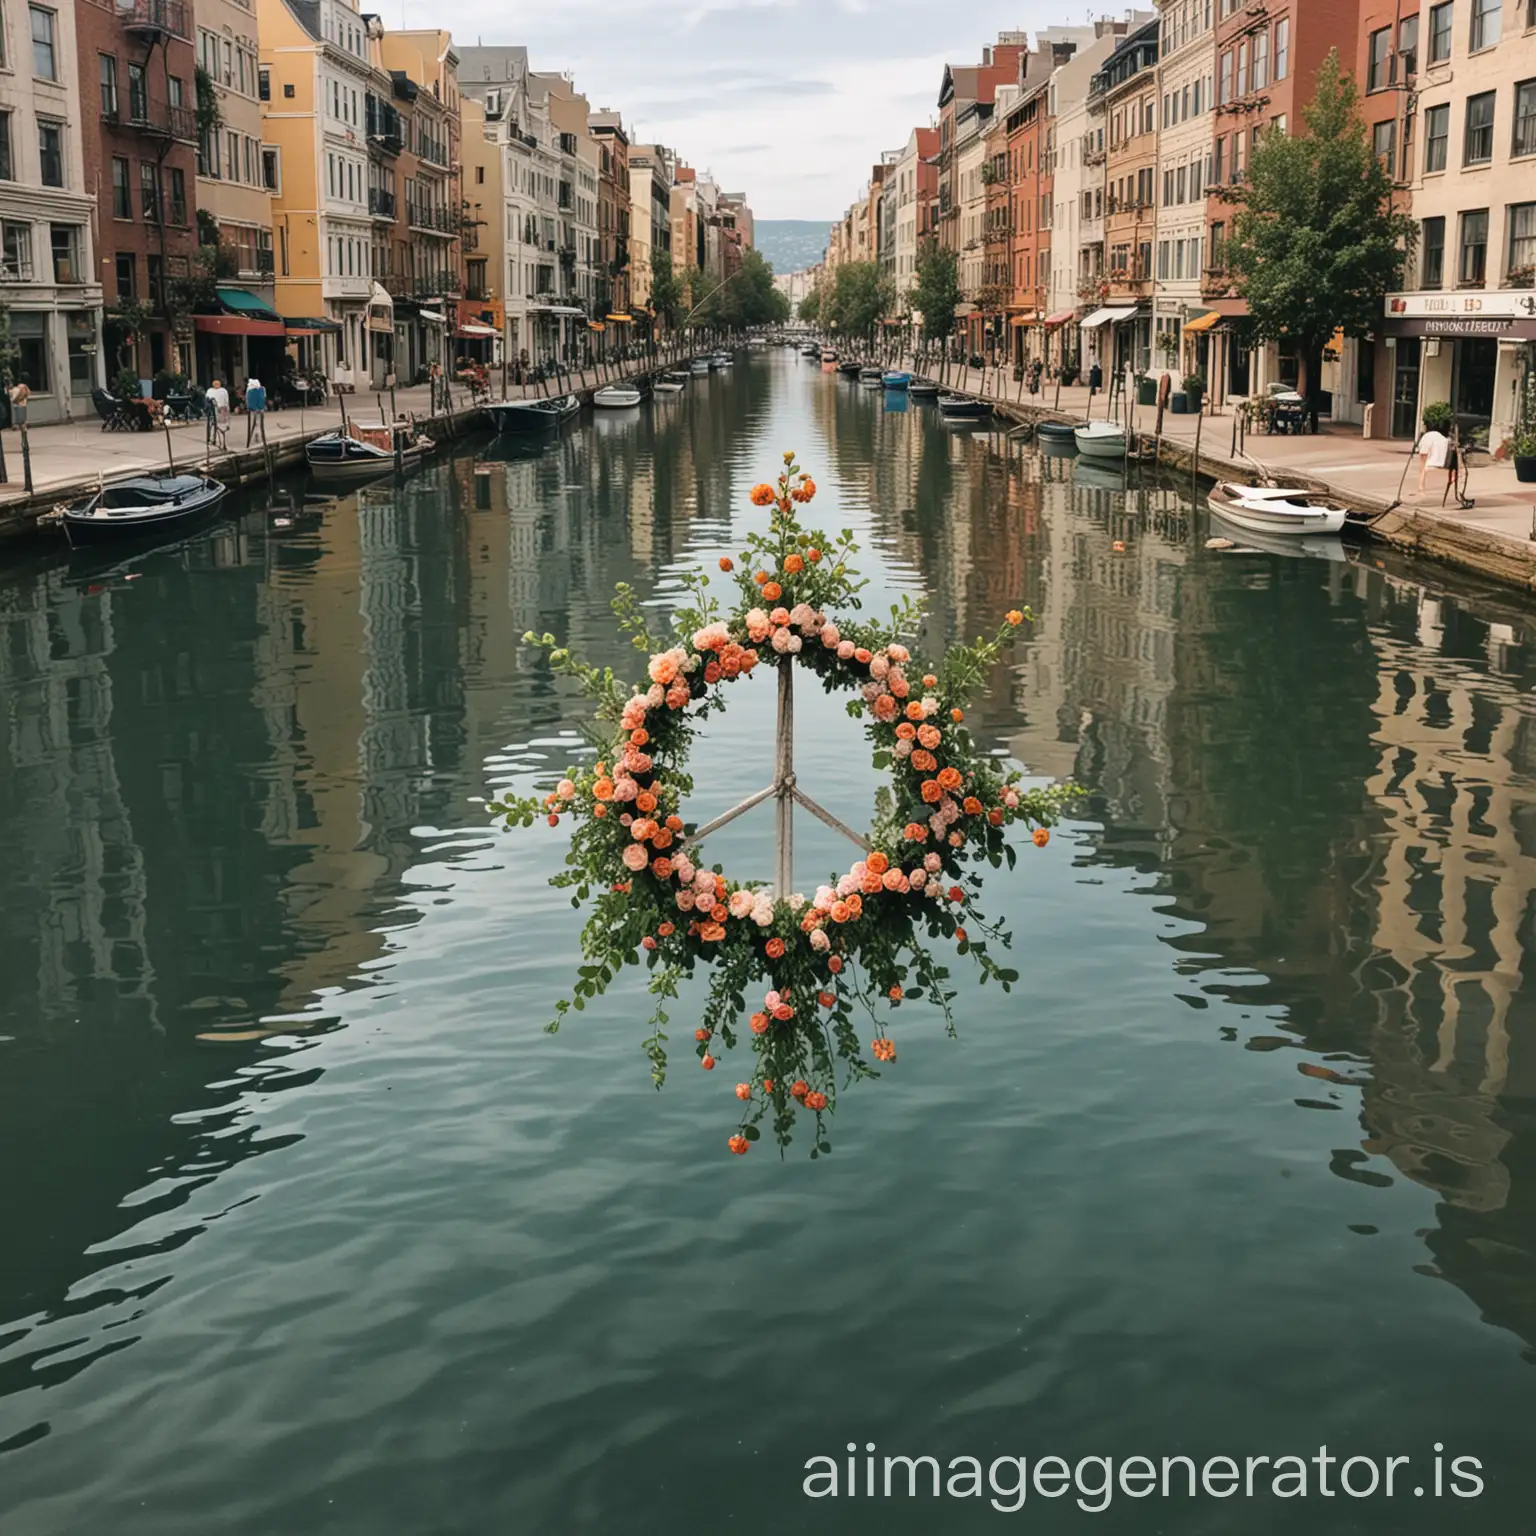 a symbol of , mindset, healthy, whimsical, flowers, calm, water, 
, cozy, city, home, peace